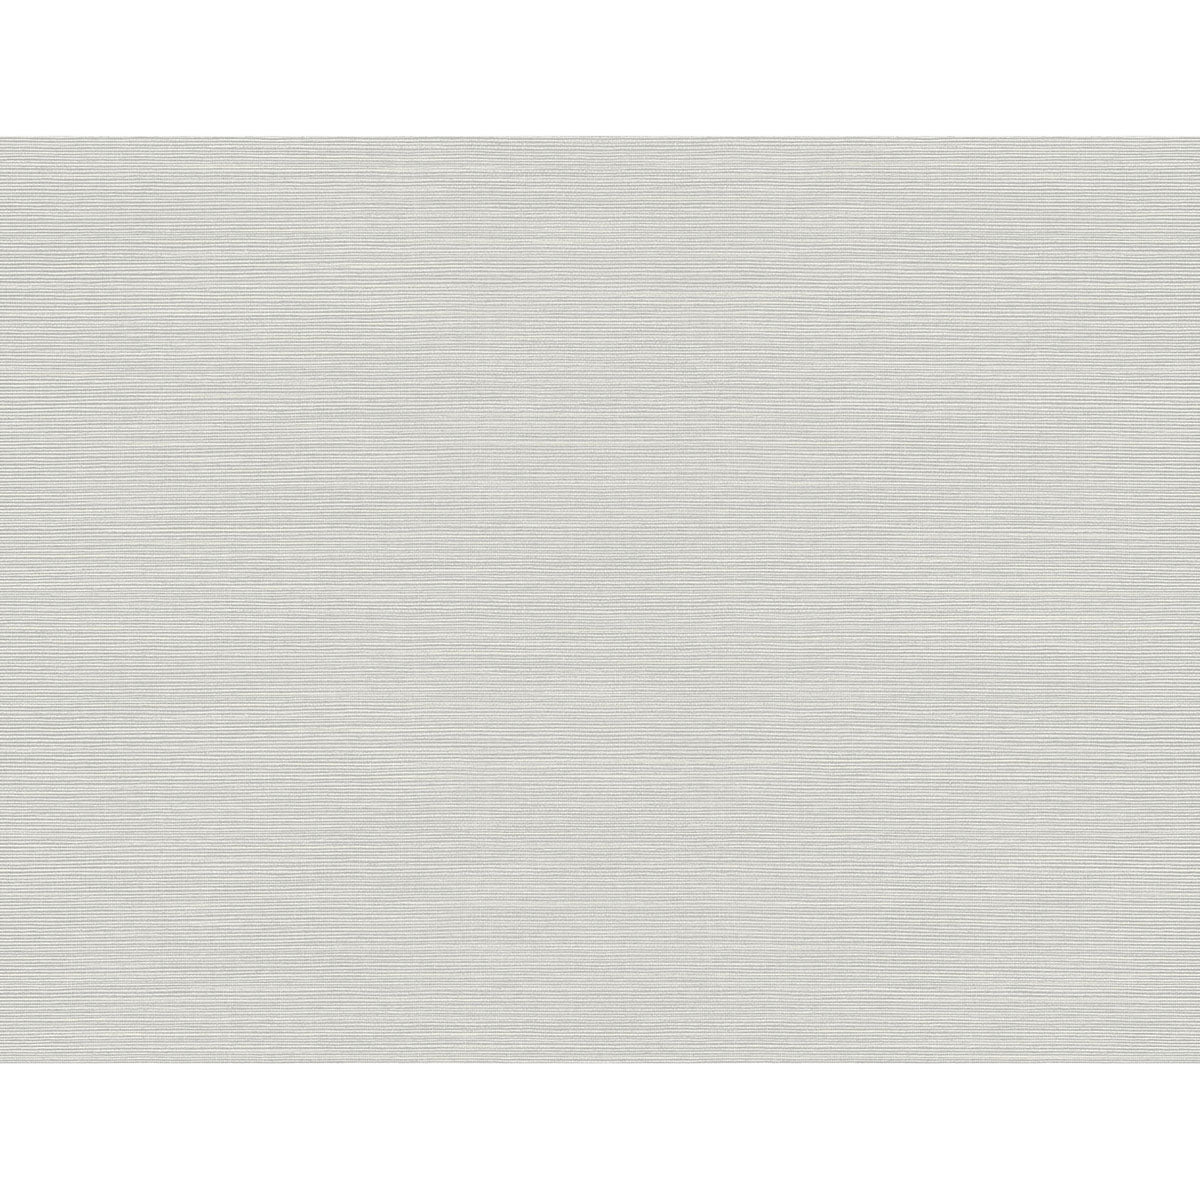 Picture of Moroccan Light Grey Sisal Texture Wallpaper